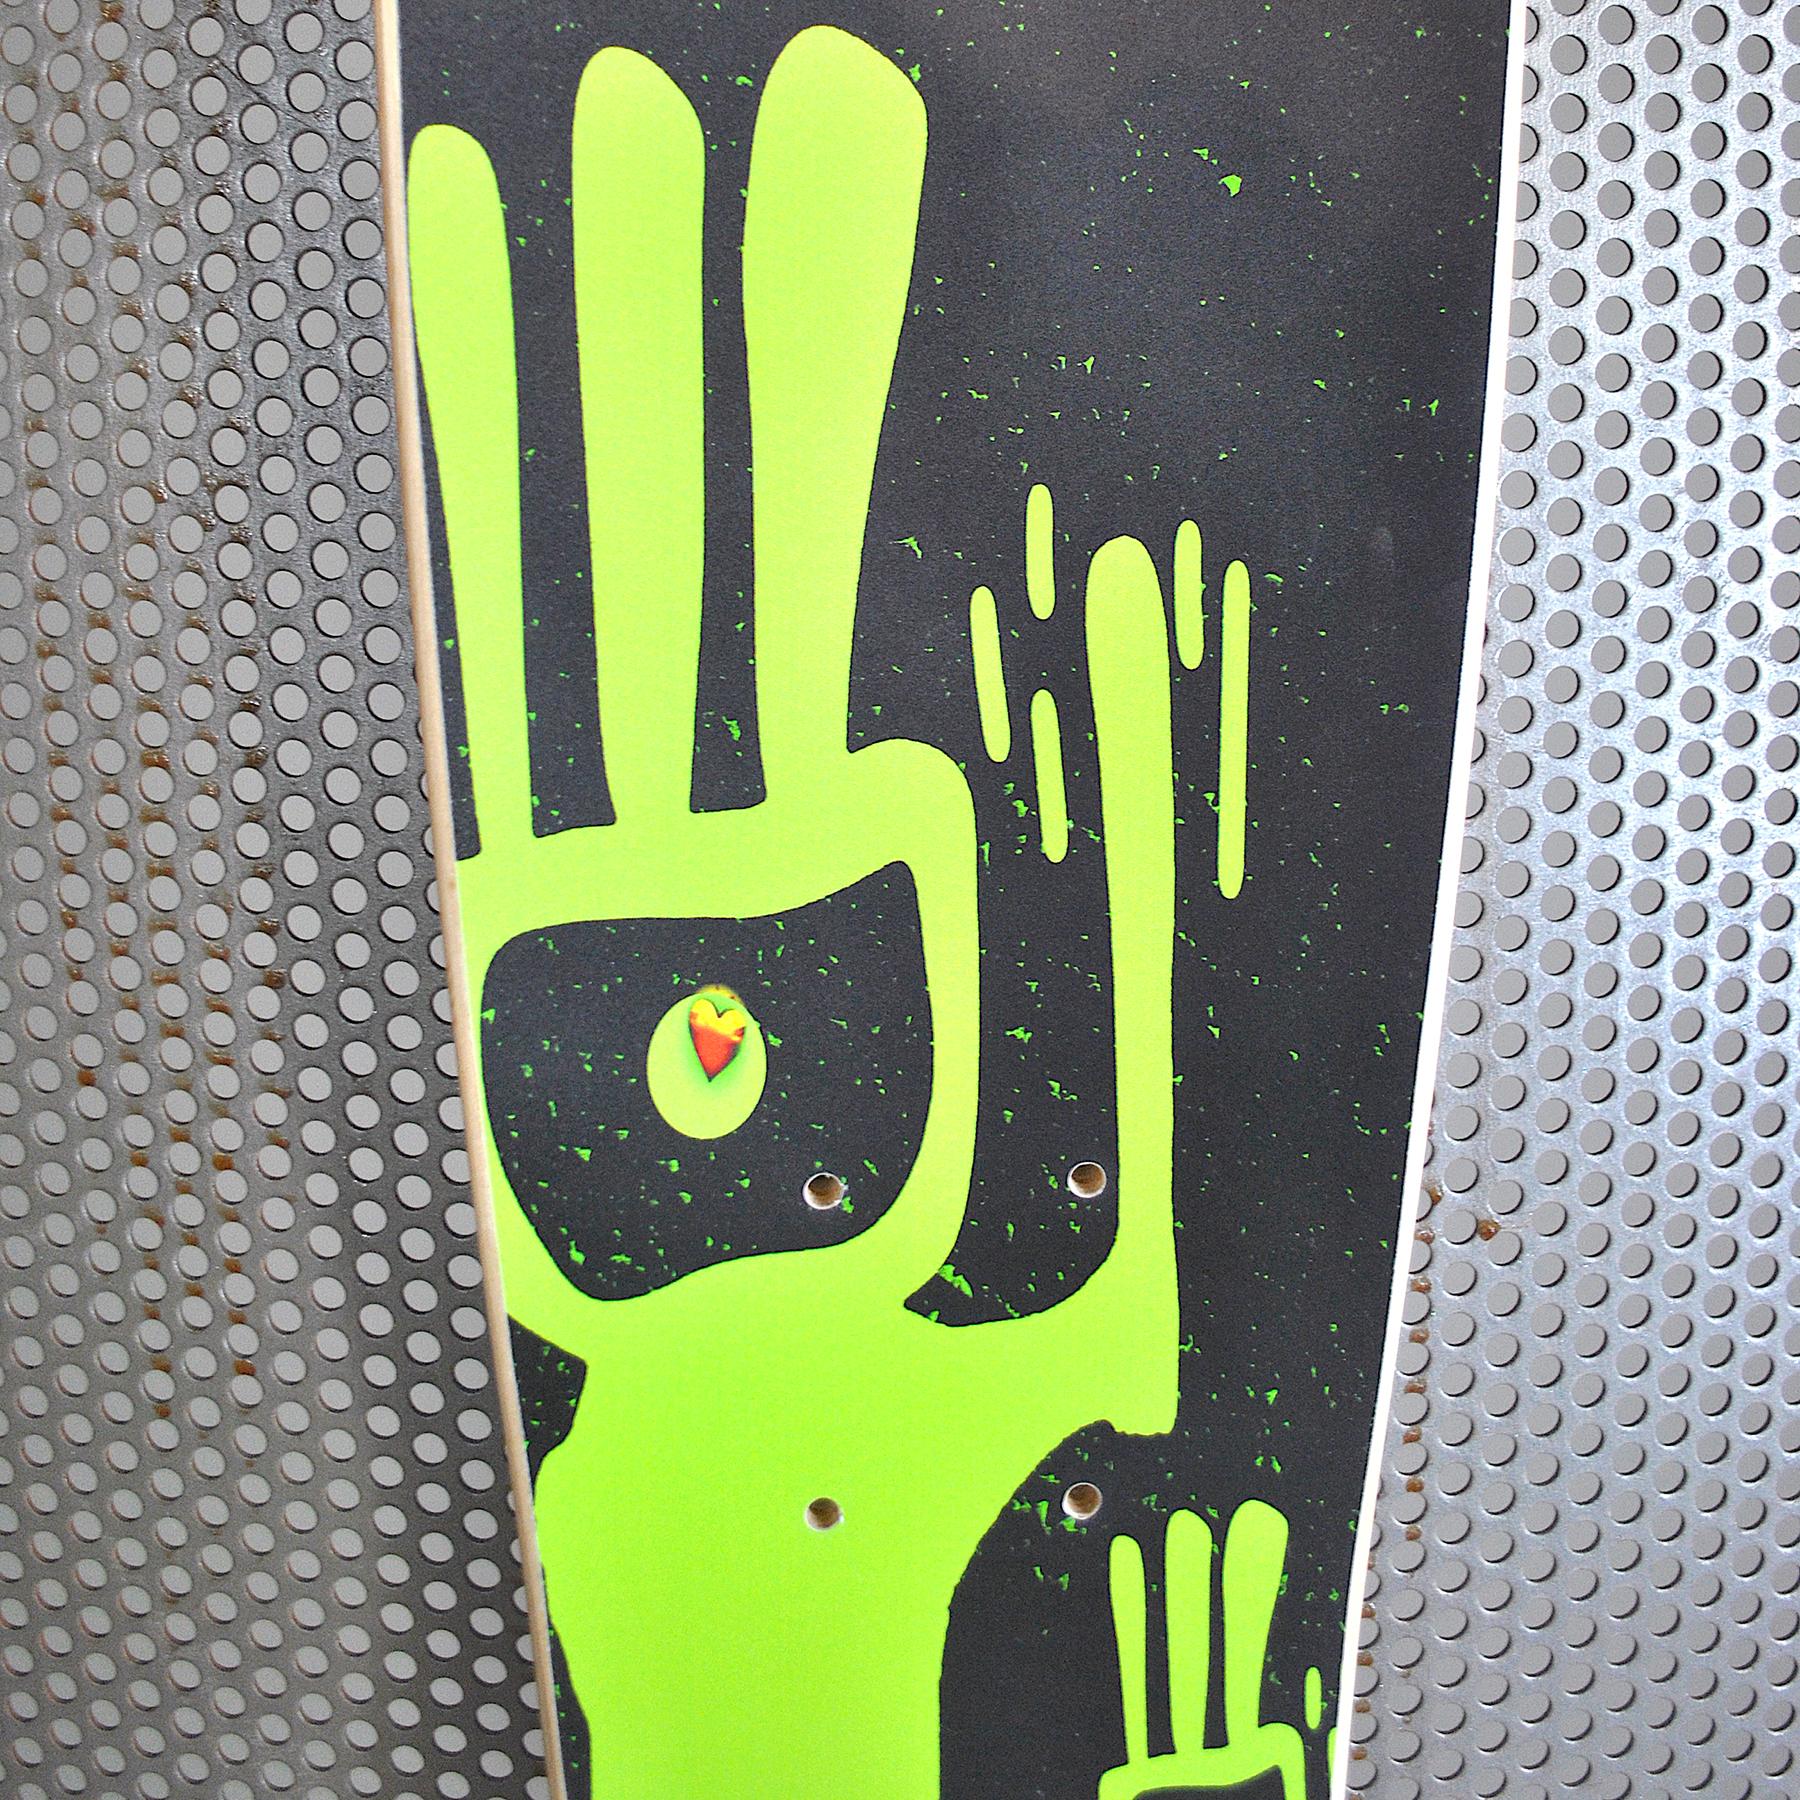 Cold-Painted Skate Deck Handmade Limited Edition by Pio Schena